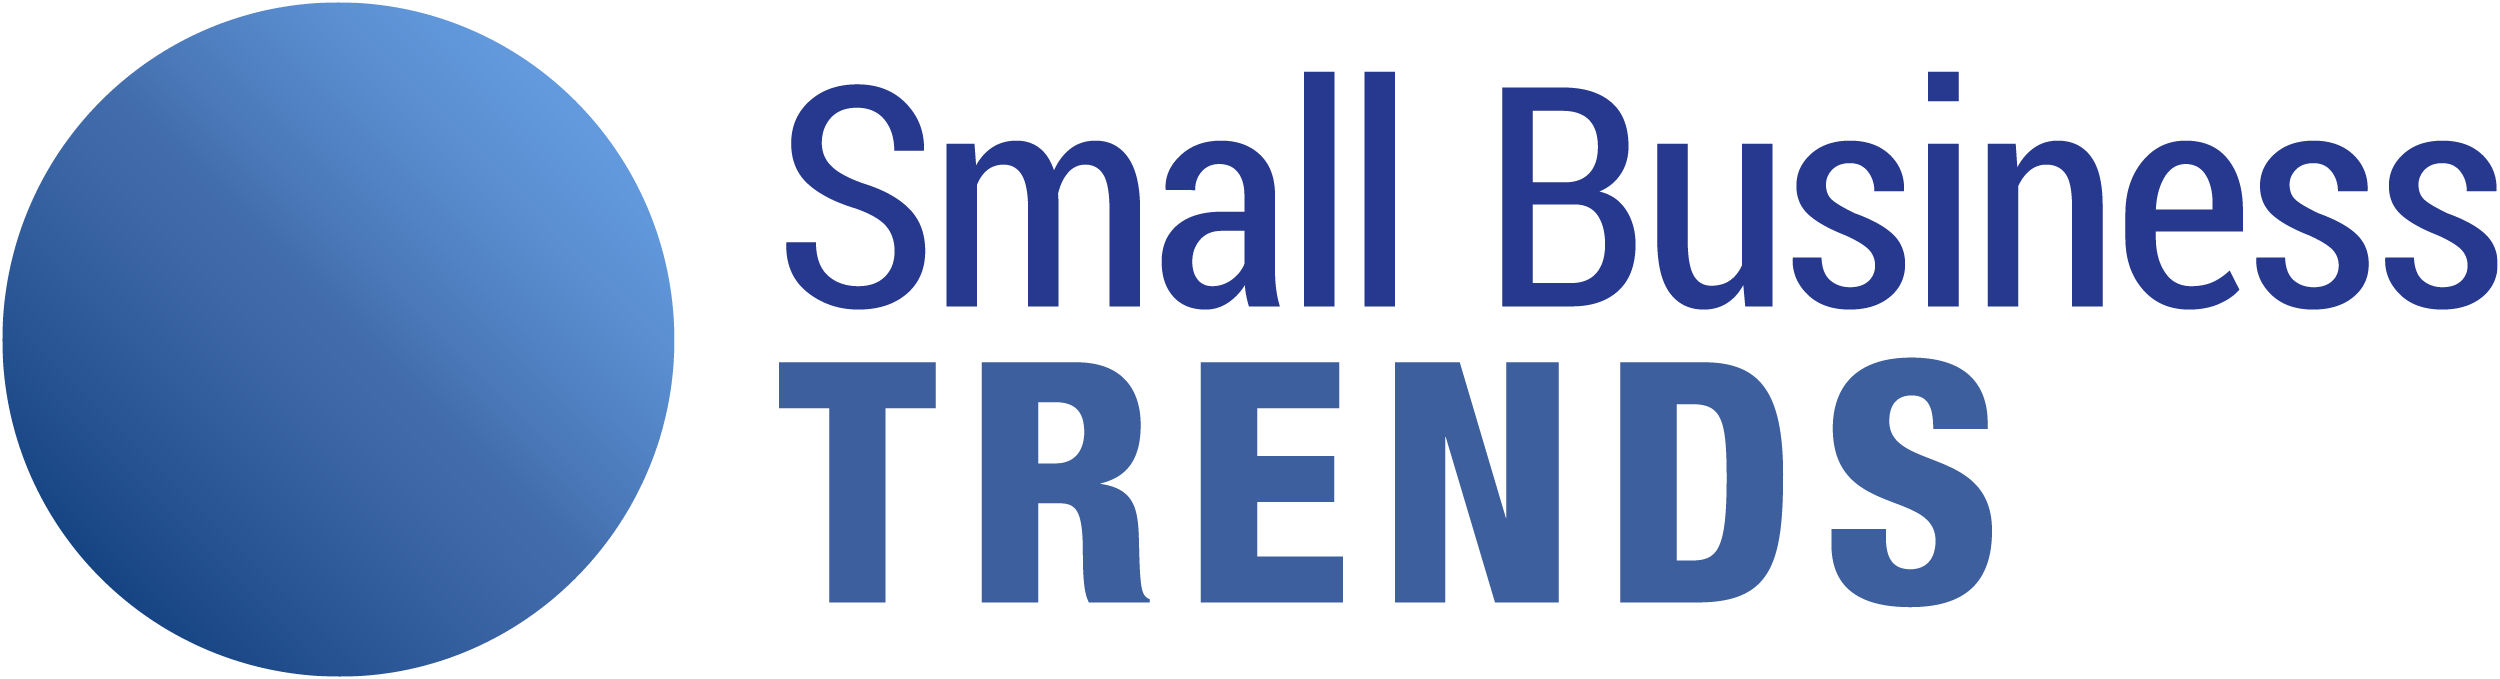 Small Company Logo - Small Business Trends Logo Business Trends